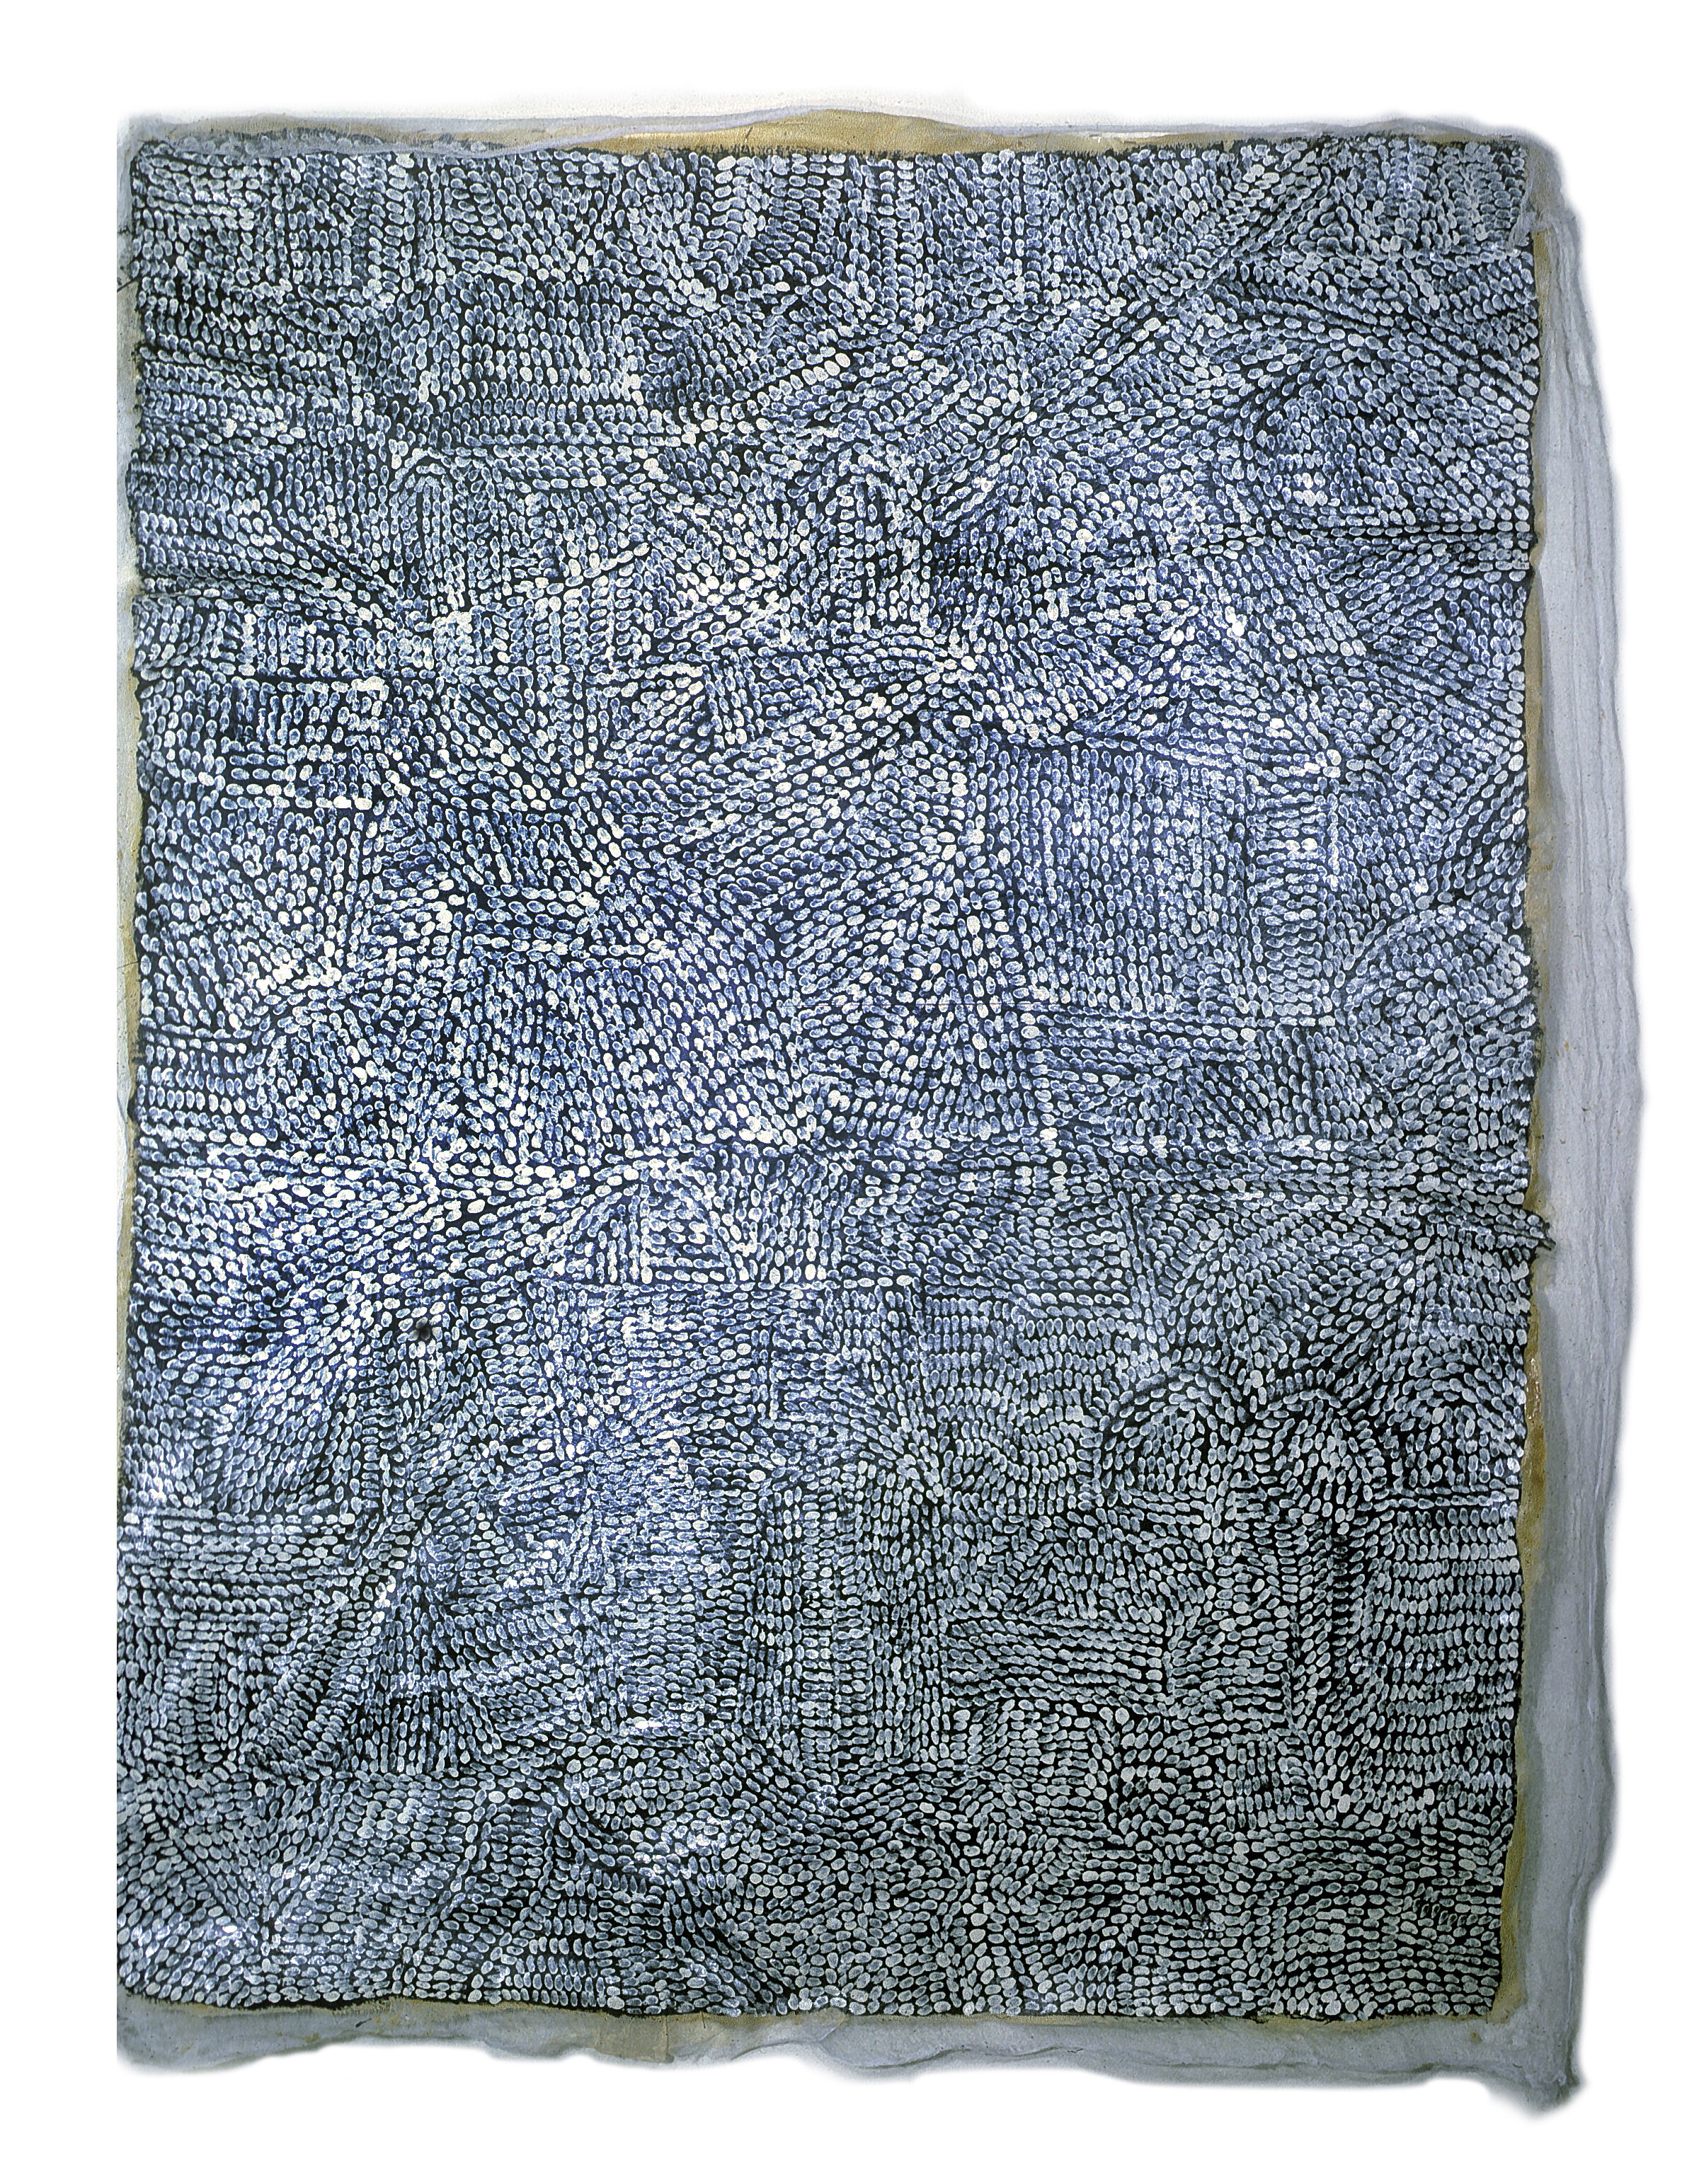   Untitled , 1971, neoprene rubber, white gacoflex, cheesecloth, 83 x 64 inches    